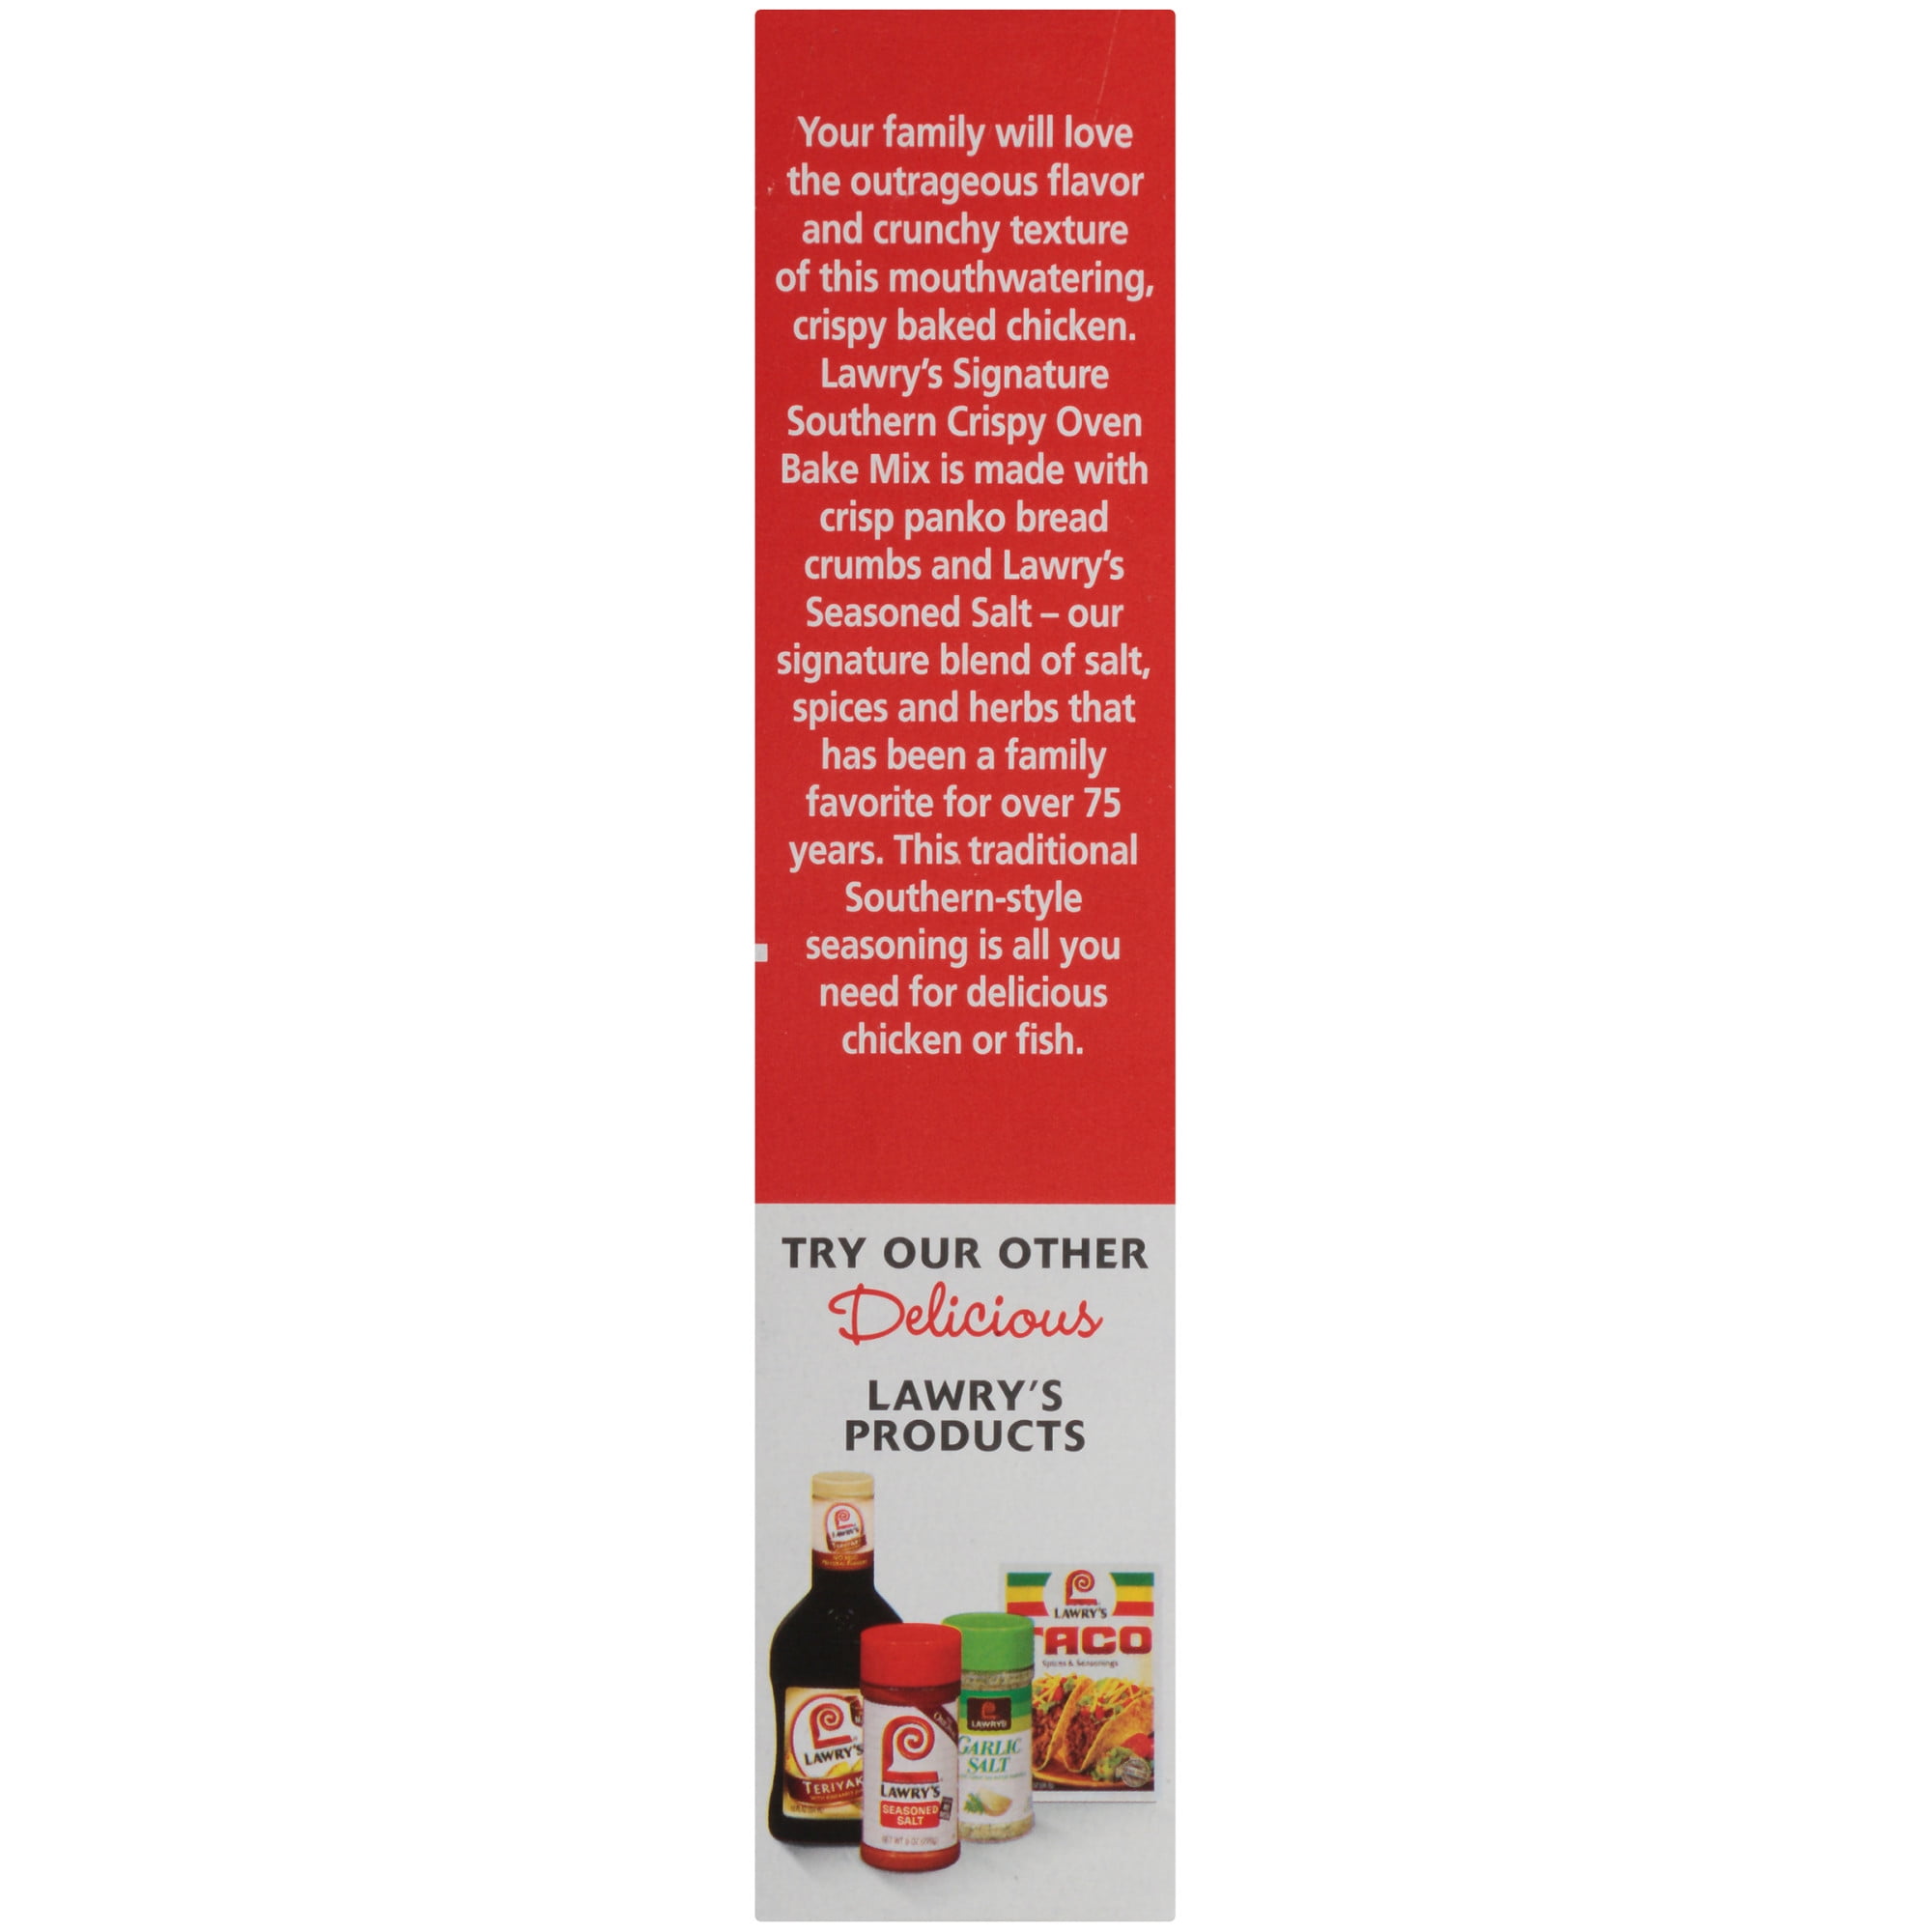 $8/mo - Finance Lawry's Seasoning Bundle (Pack of 2) includes 1